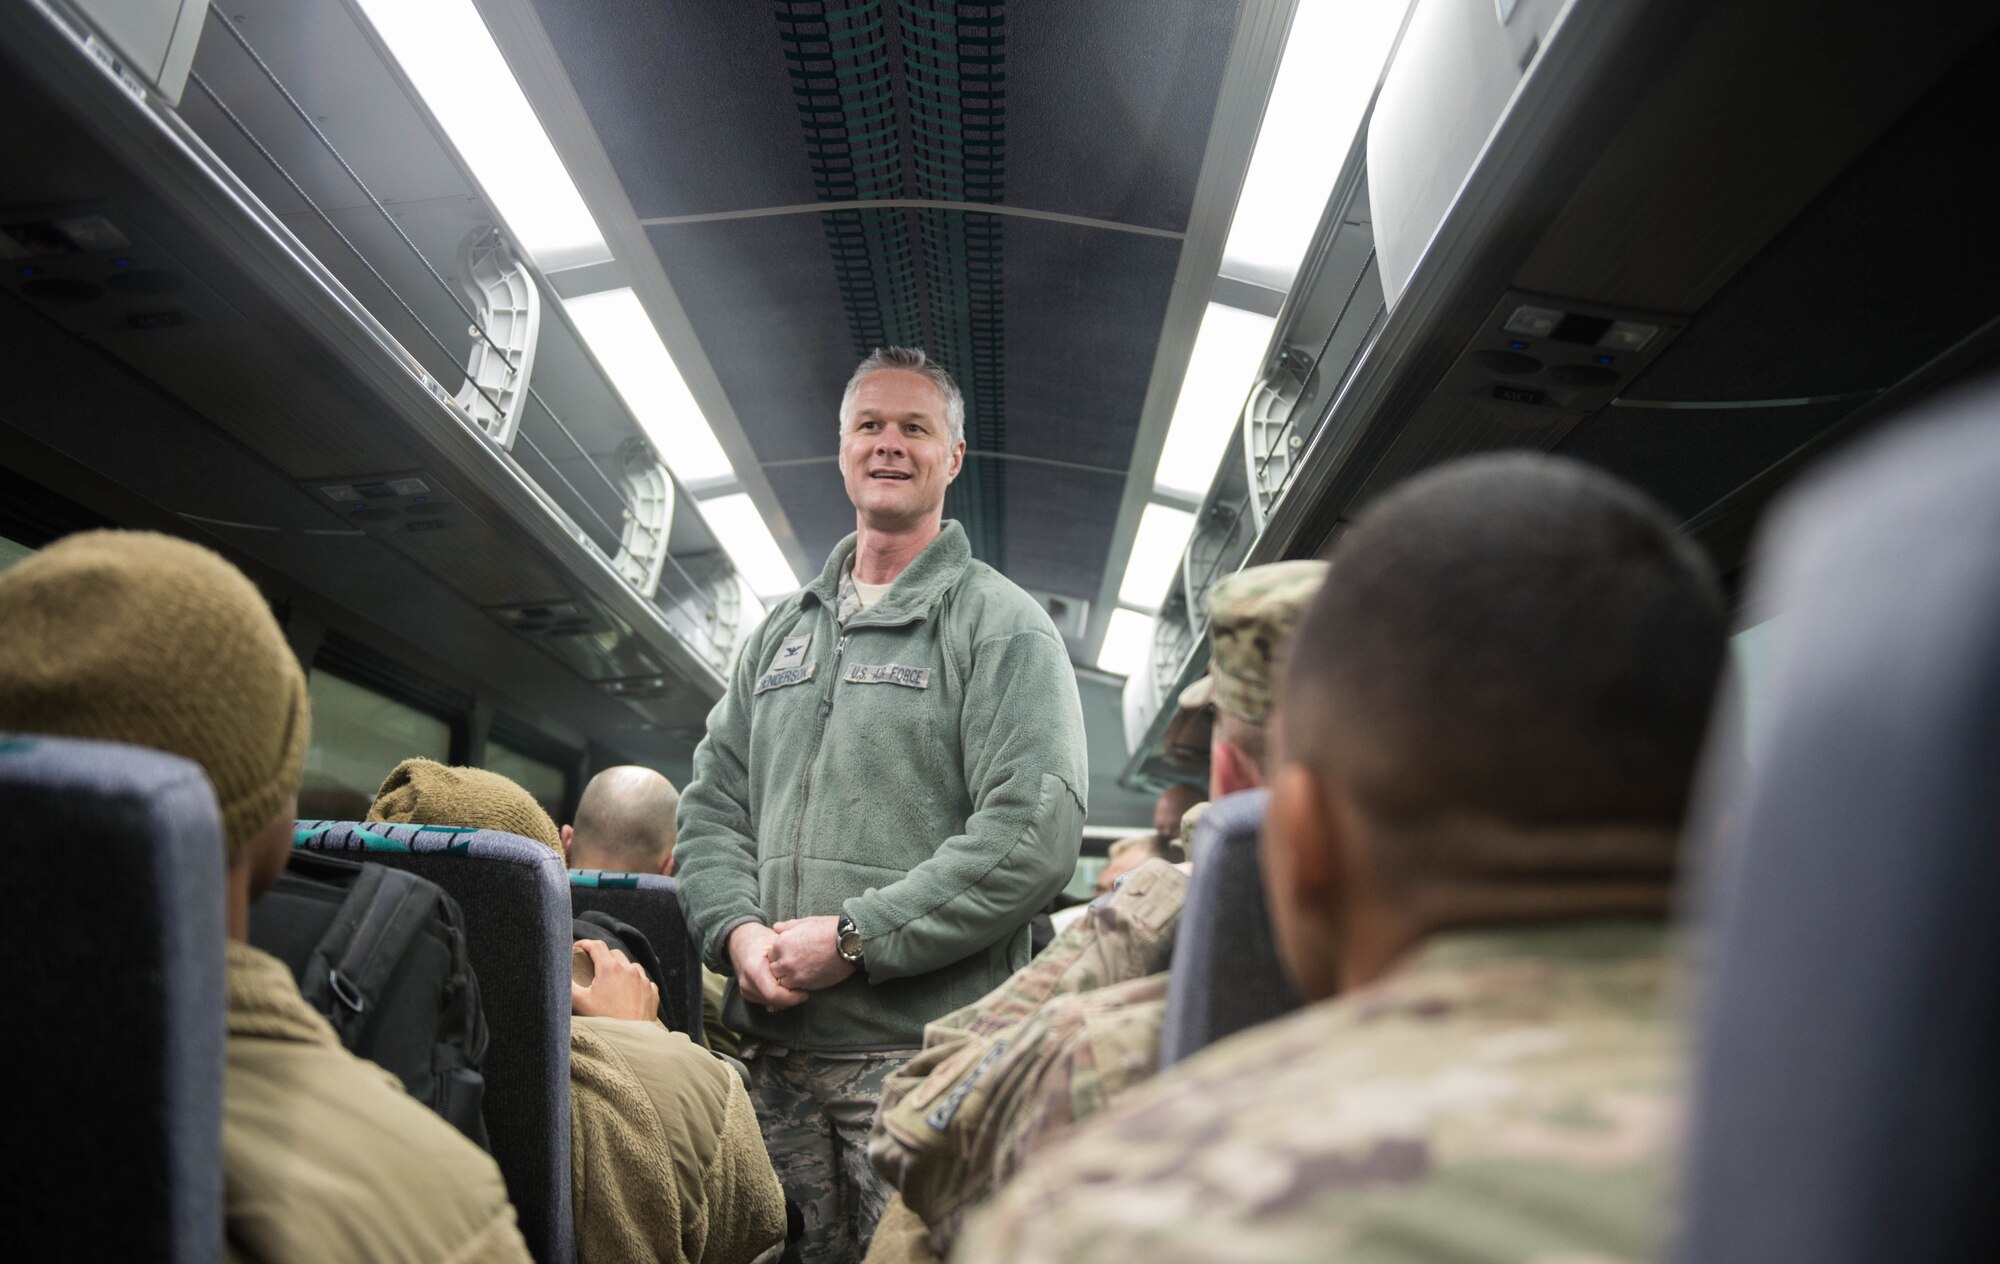 Col. Charles Henderson, 621st Contingency Response Wing commander, greets Airmen as they return from a three-month deployment to Iraq, in support of Operation Inherent Resolve, Jan. 18, 2017, at Travis Air Force Base, California. The CRW played a crucial role in reopening Qayyarah West Airfield and moving more than 1,423 short tons of cargo in and out of the region. (U.S. Air Force Photo by Staff Sgt. Robert Hicks)